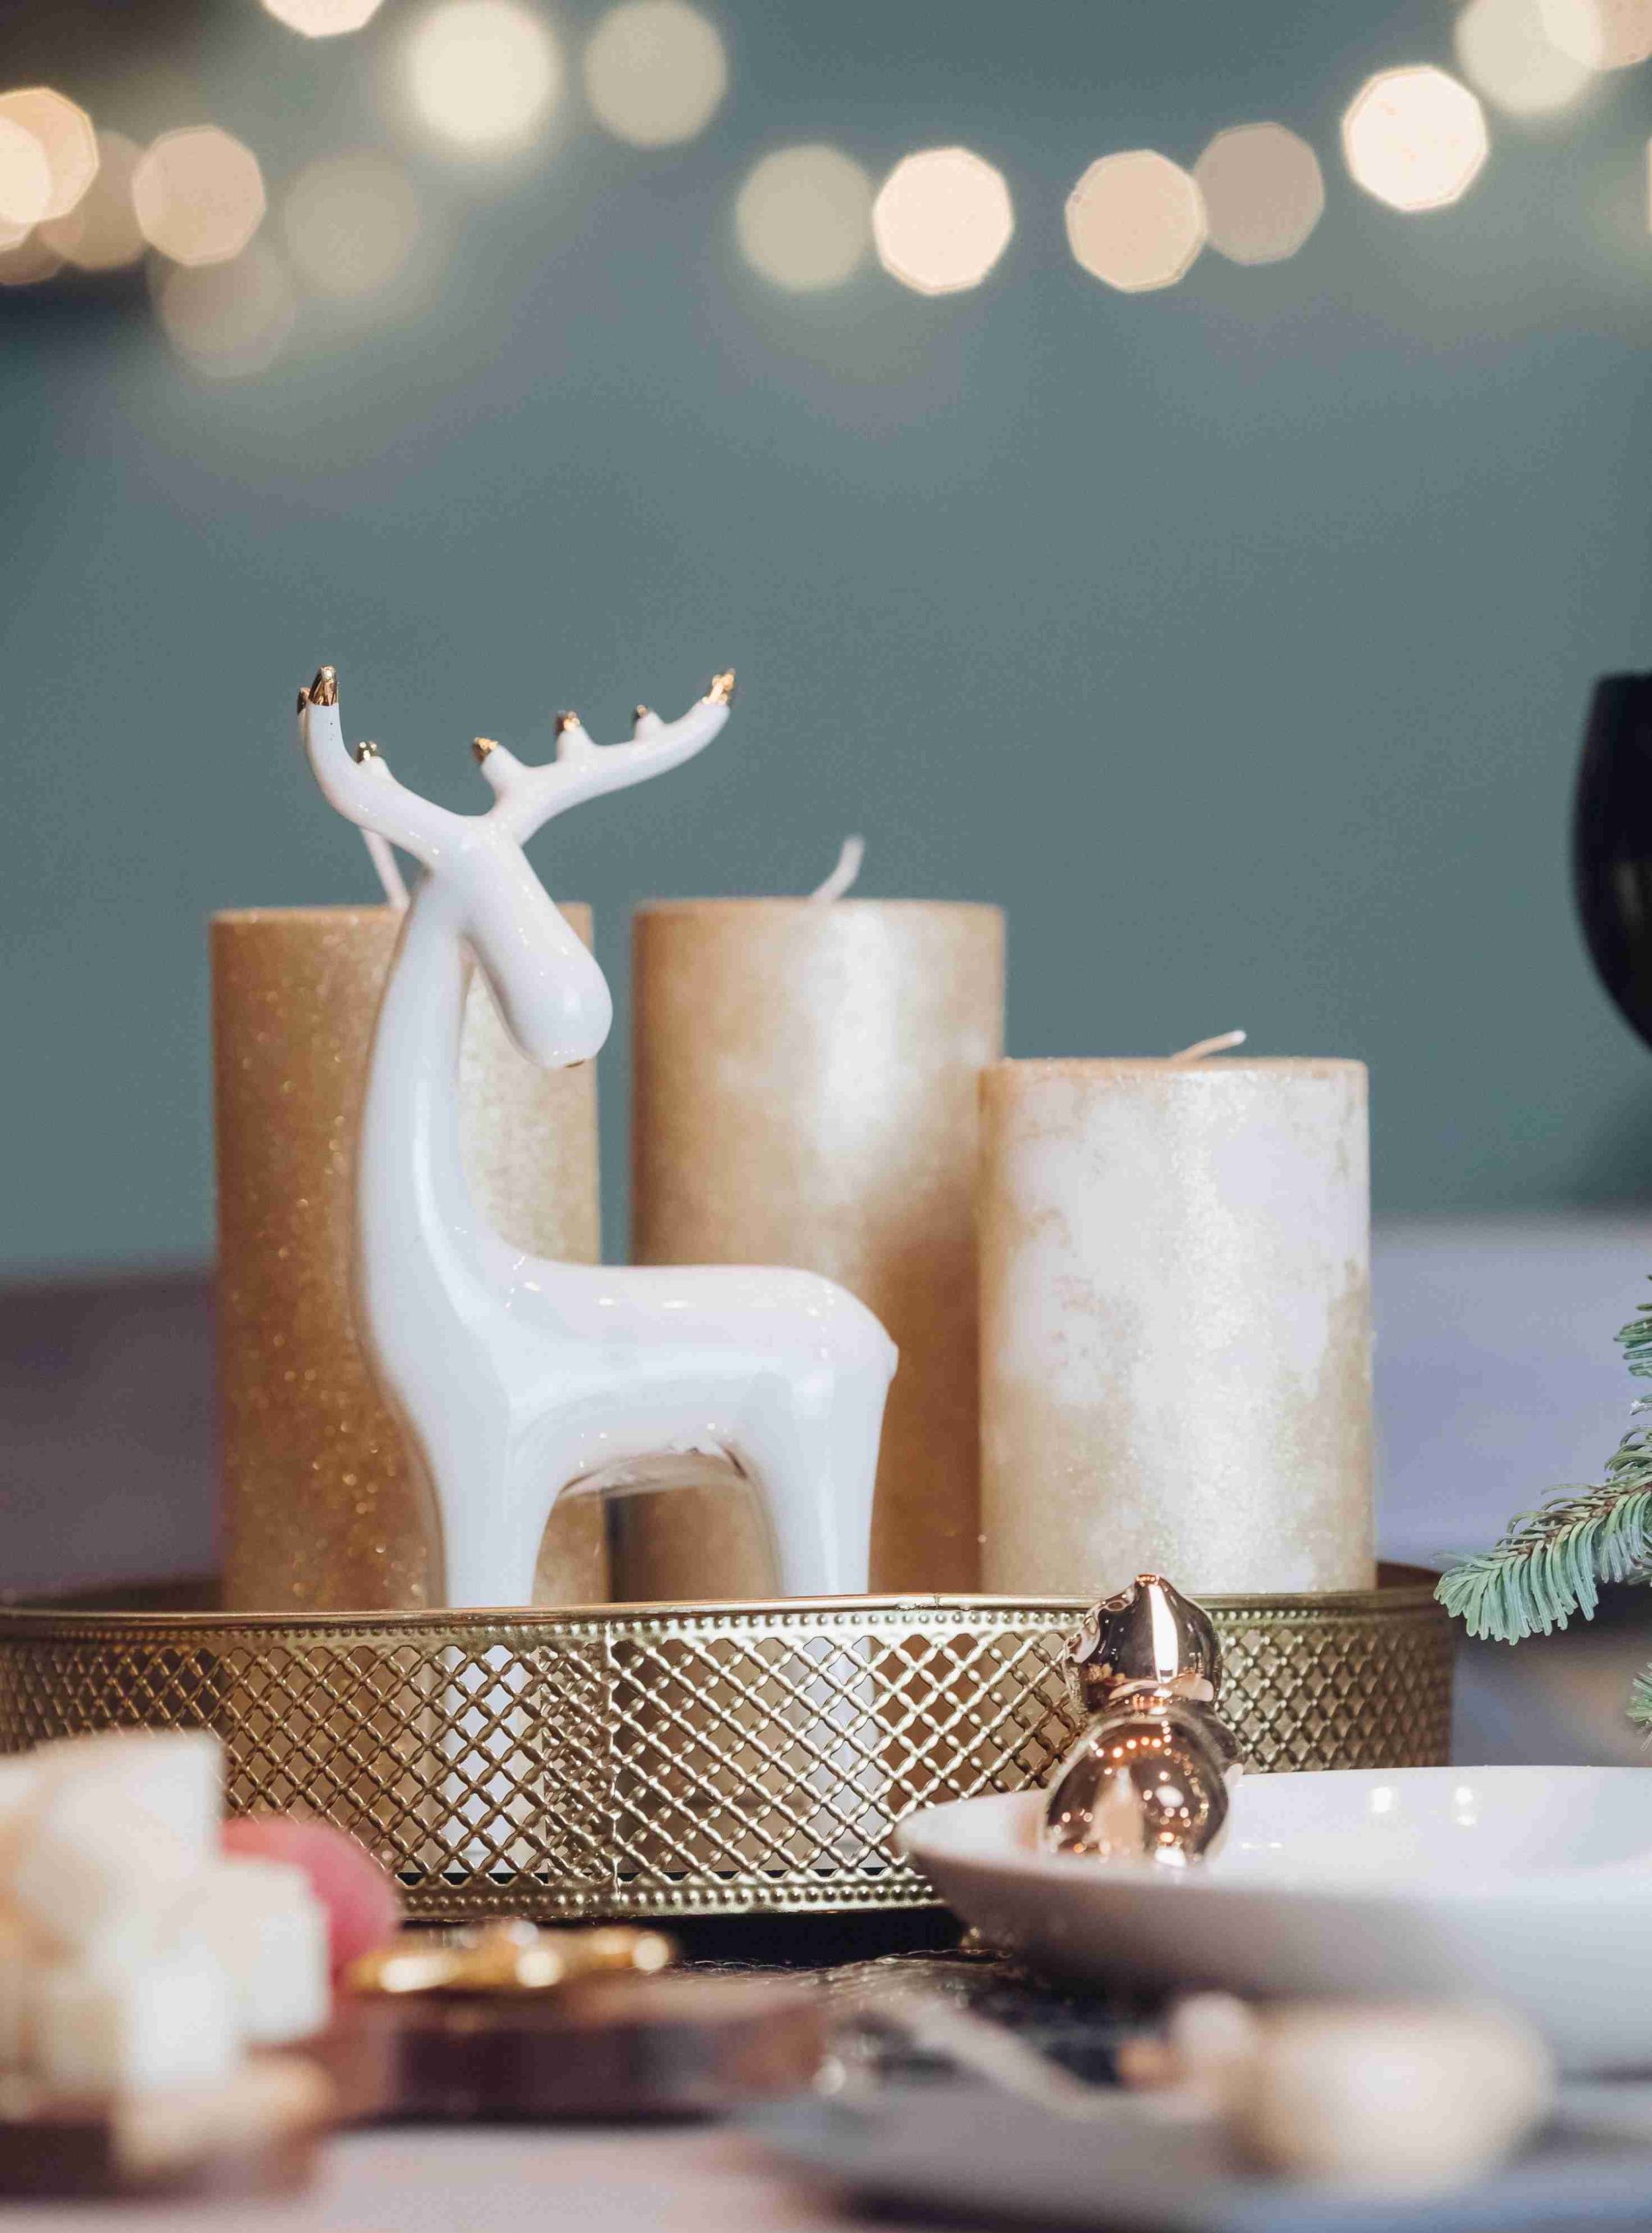 christmas-table-living-room-with-objects-holiday-decor-new-year-eve-concept